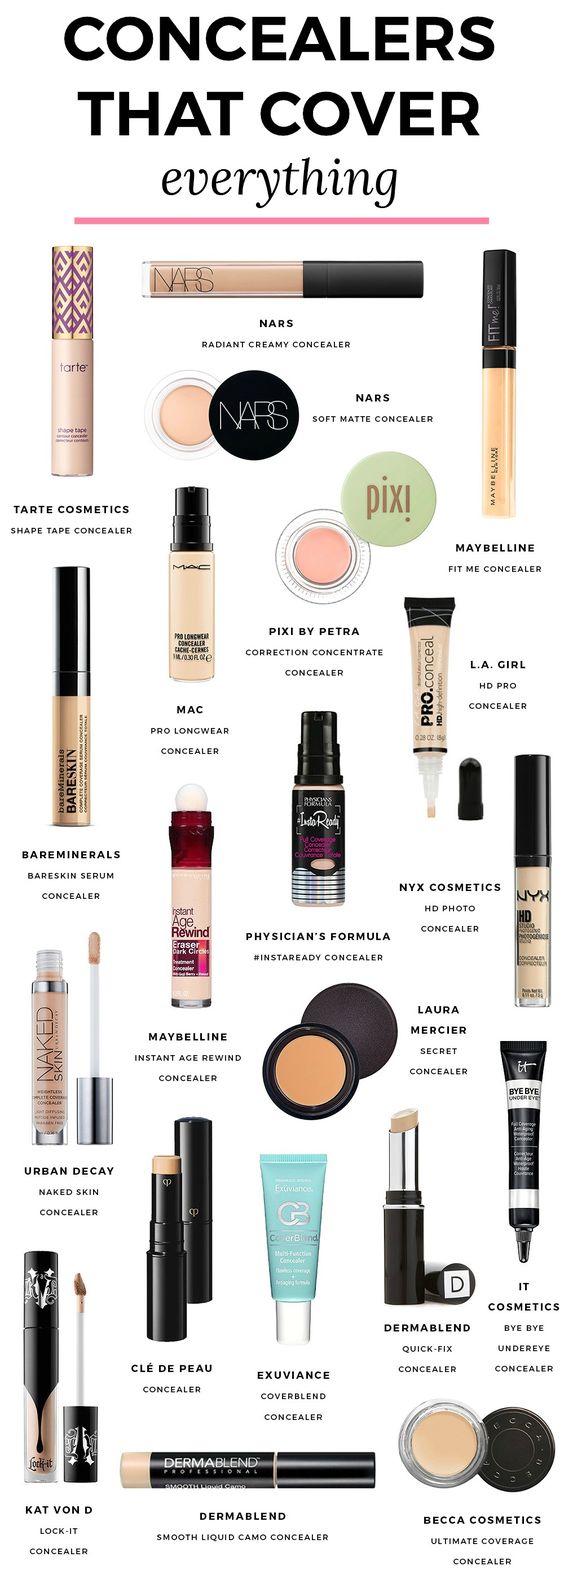 Concealers that cover EVERYTHING. | The best concealers for under eye circles and blemishes in every price range that provide full coverage for dark circles and spots. | Best concealers, best makeup, ride or die makeup, favorite makeup, favorite concealers, concealer for dark circles, beauty secrets, beauty tips, makeup artist favorite concealers, Tarte Shape Tape, NARS Radiant Concealer, Maybelline Fit Me, color correcting concealer, Florida beauty blogger Ashley Brooke Nicholas